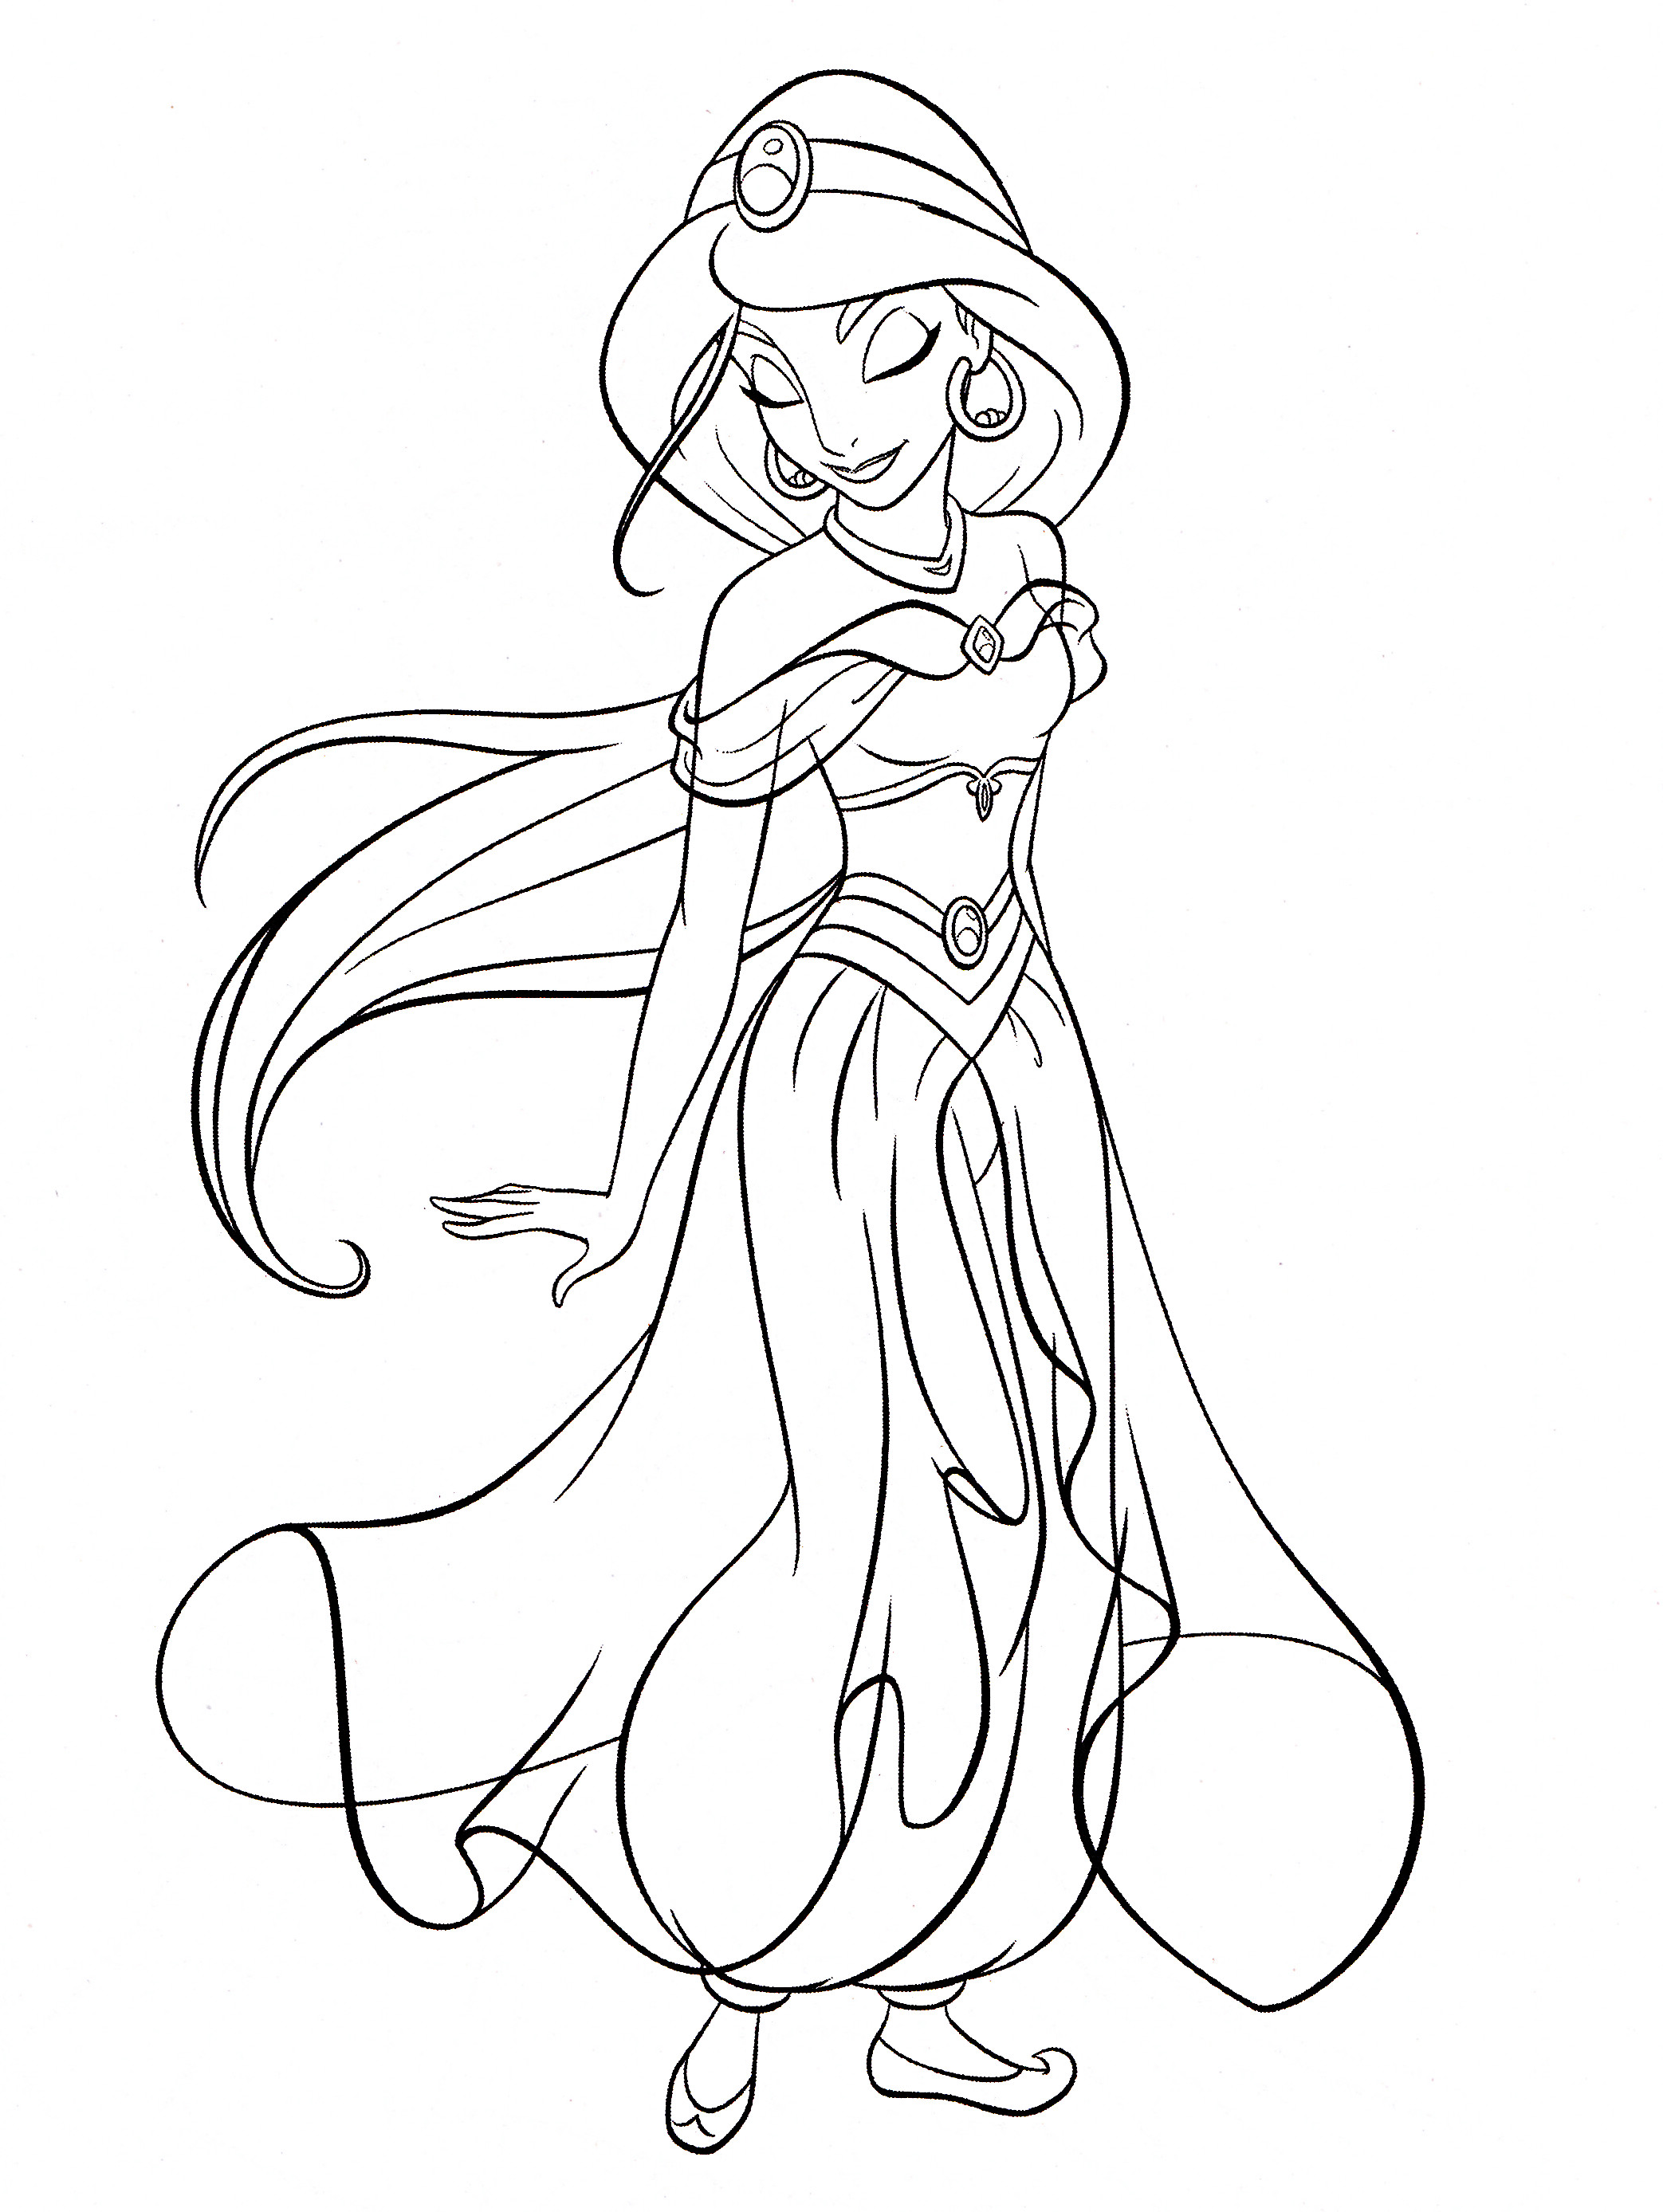 2086x2775 Full Size of Coloring Pages: Walt Disneys Images Coloring Pages Princess  Jasmine: ...